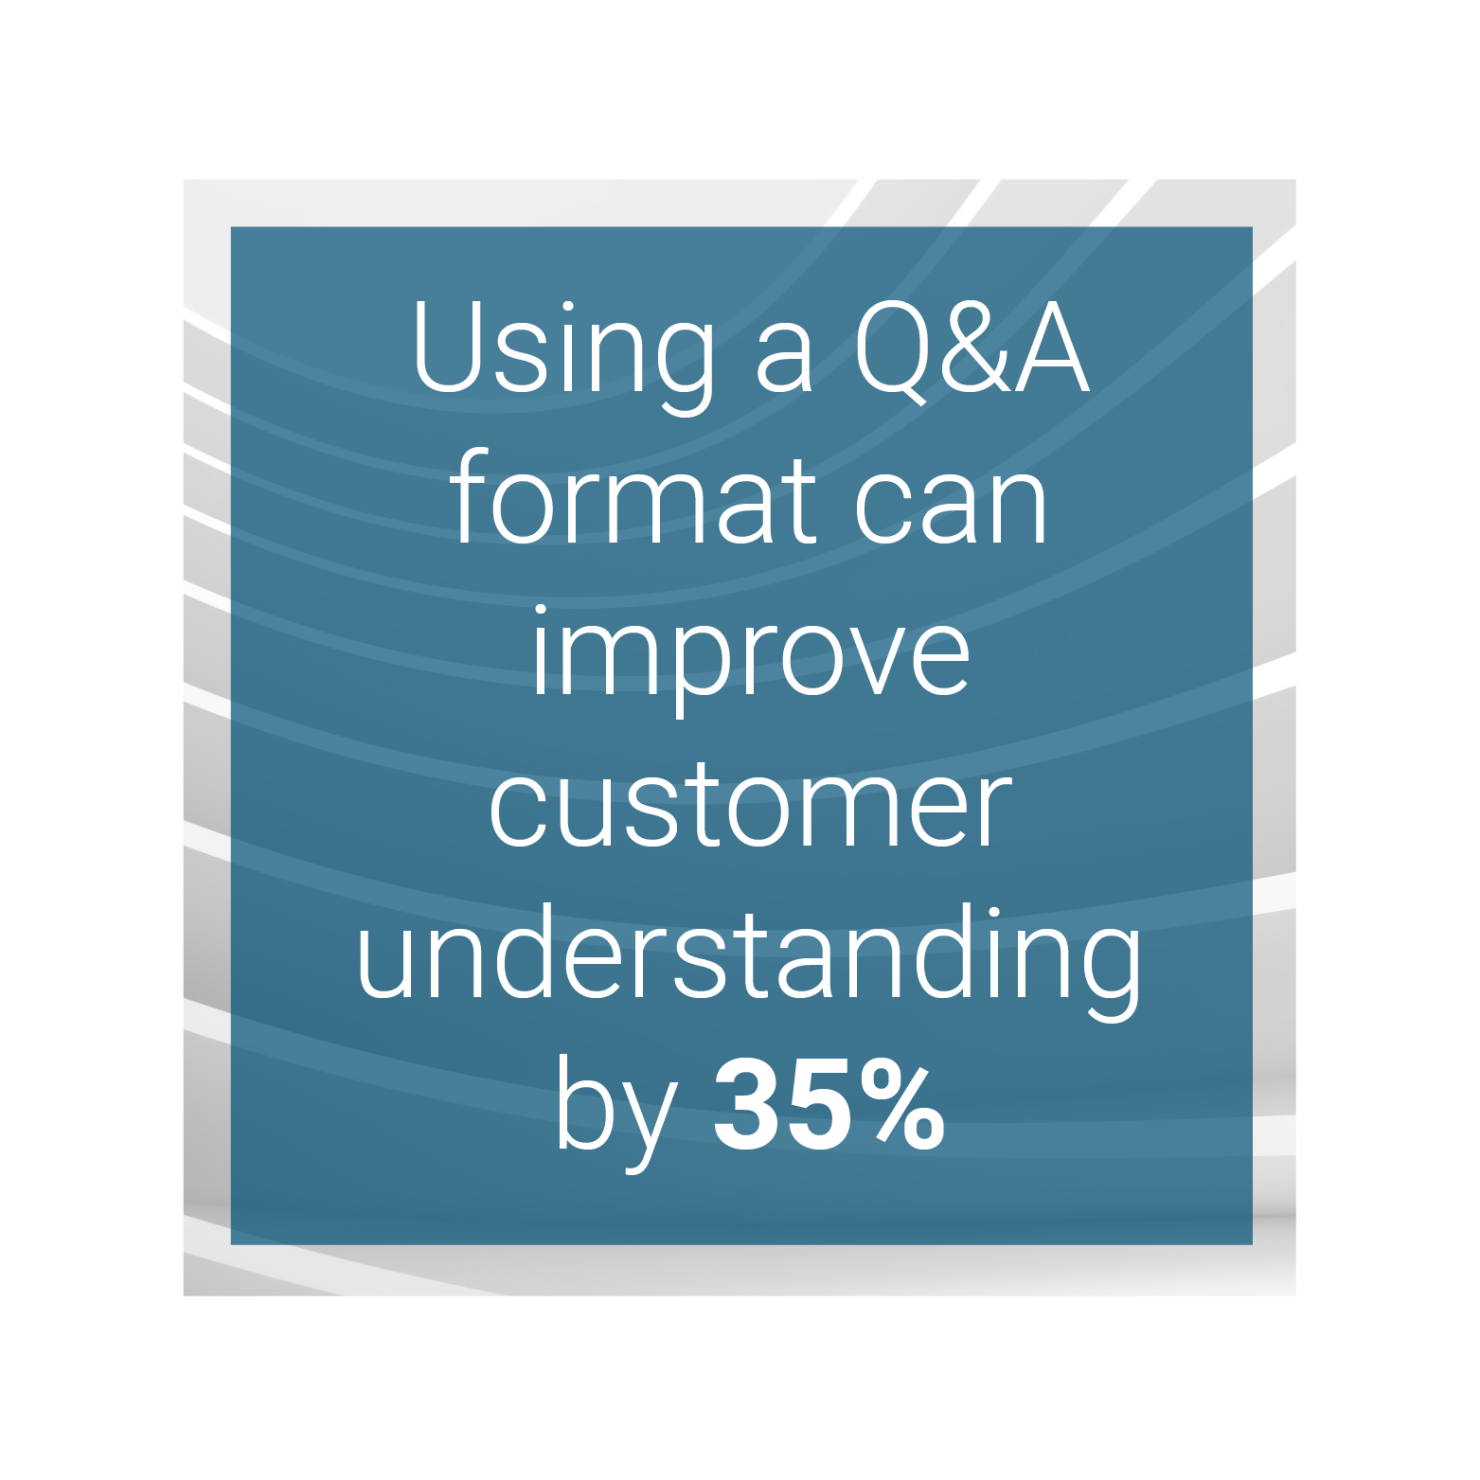 Using a Q&A format can improve customer understanding by 35%